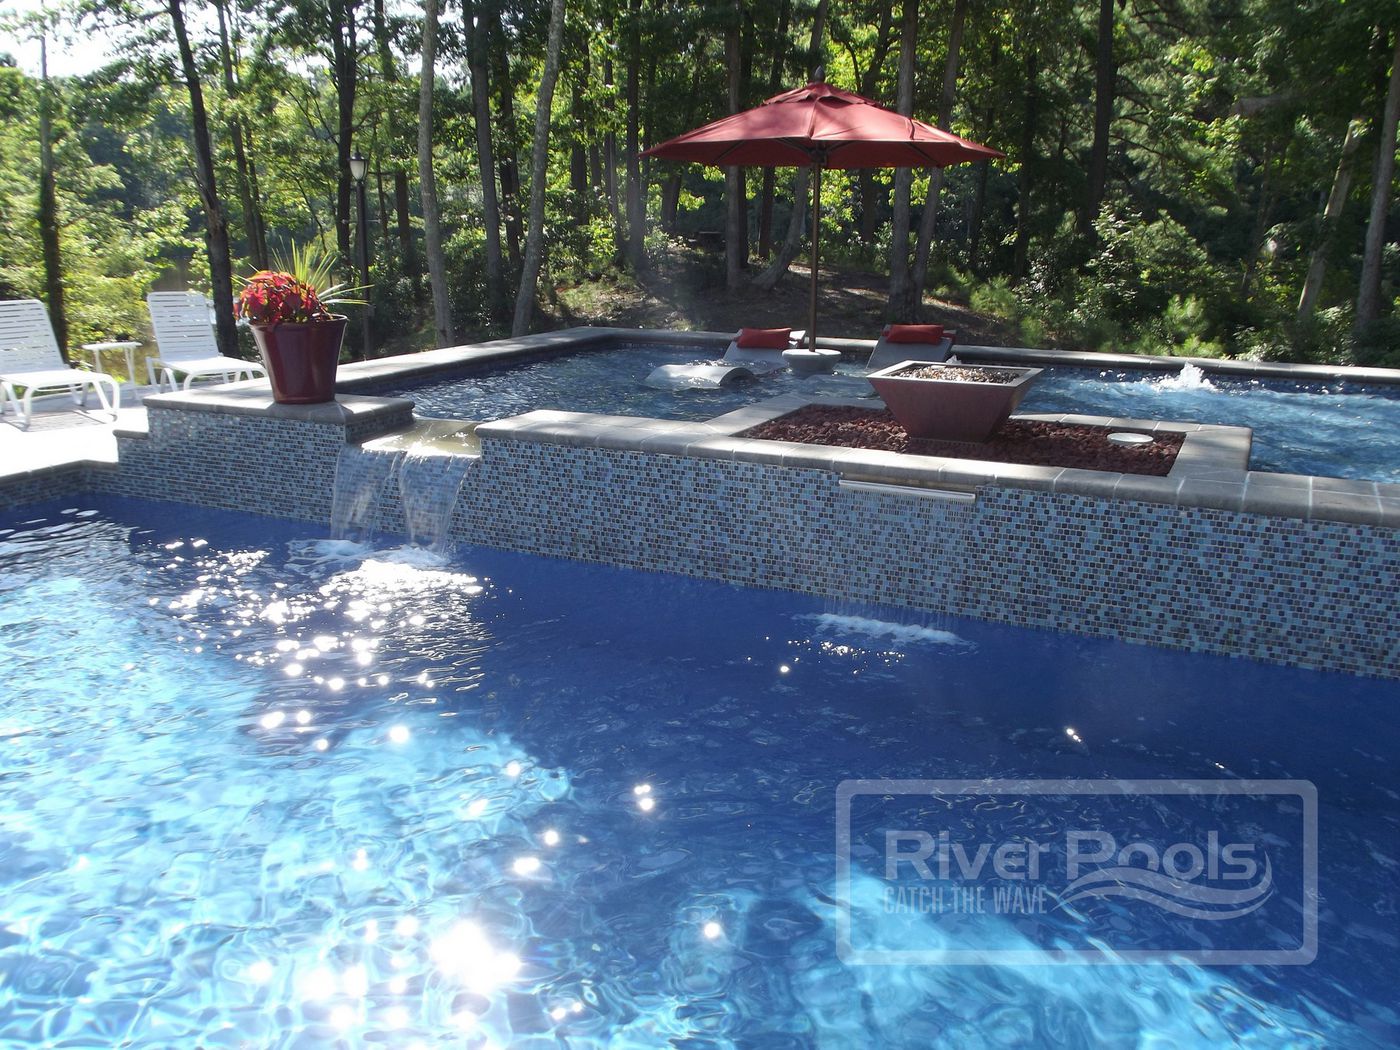 What Are the Biggest and Smallest Sizes for Fiberglass Pools?